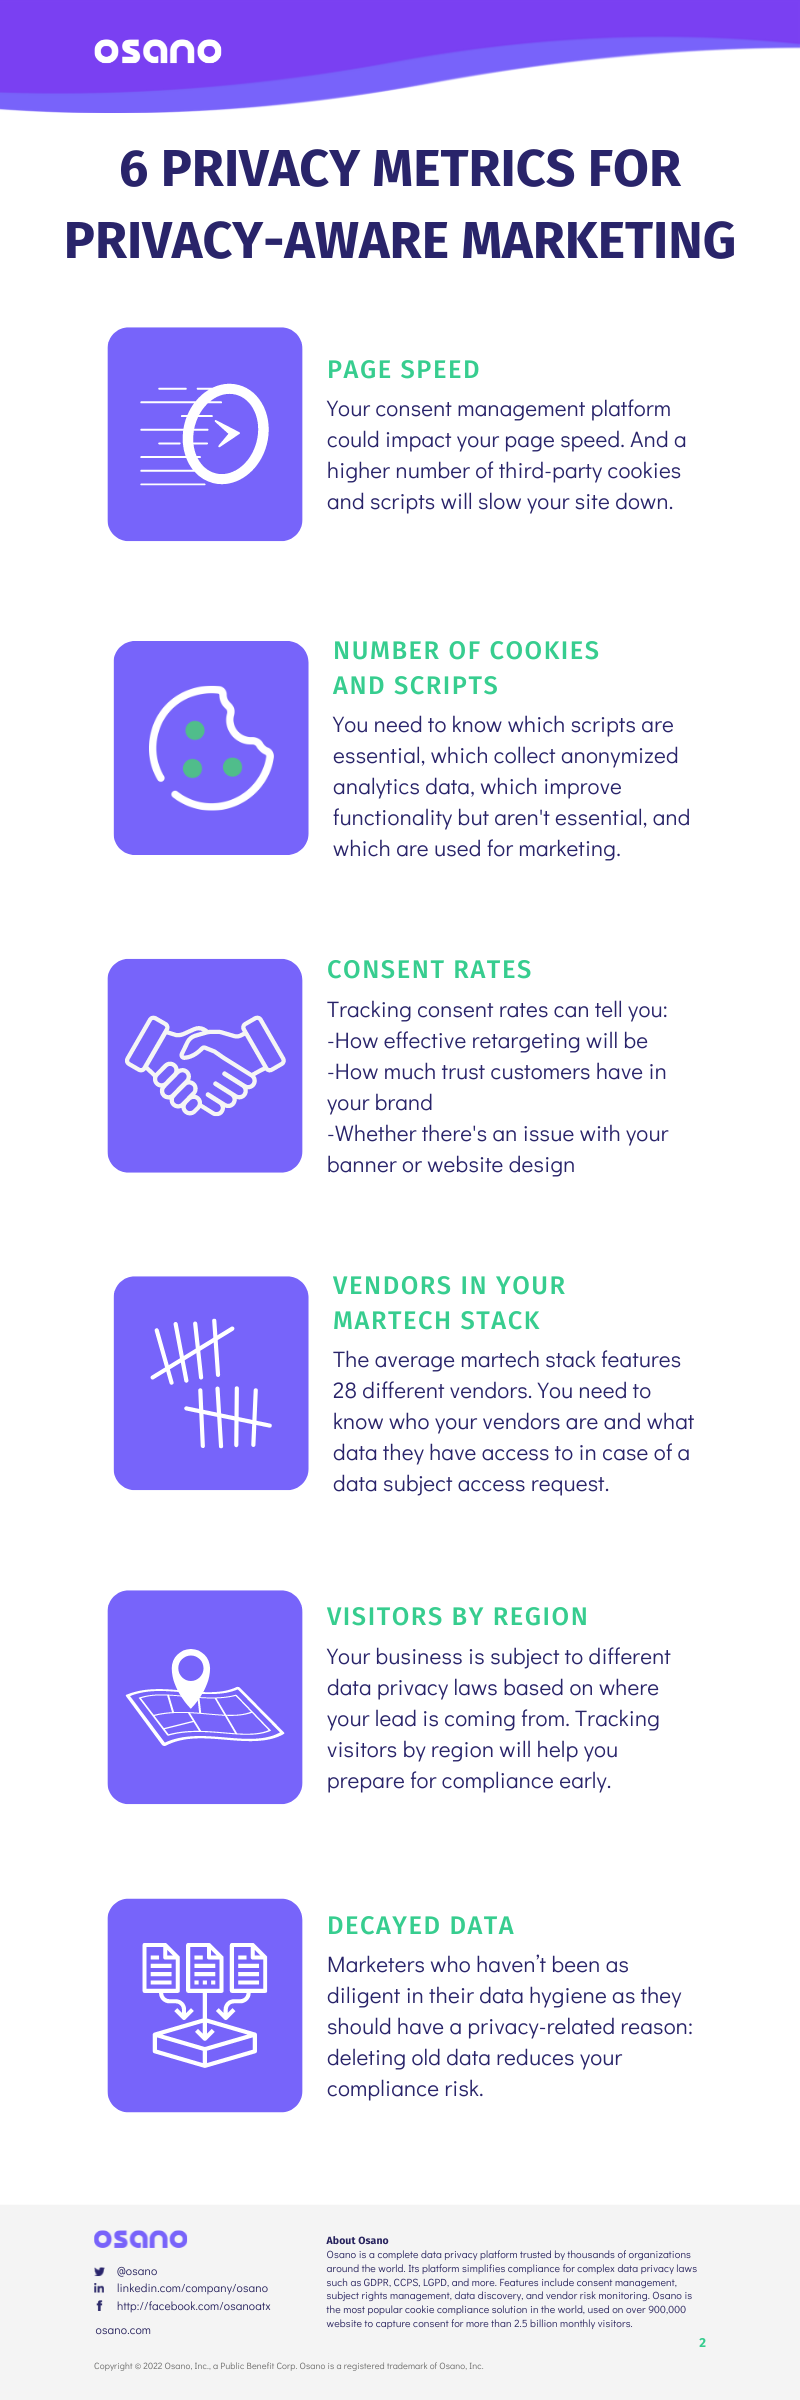 infographic-6 privacy metrics for privacy aware marketers